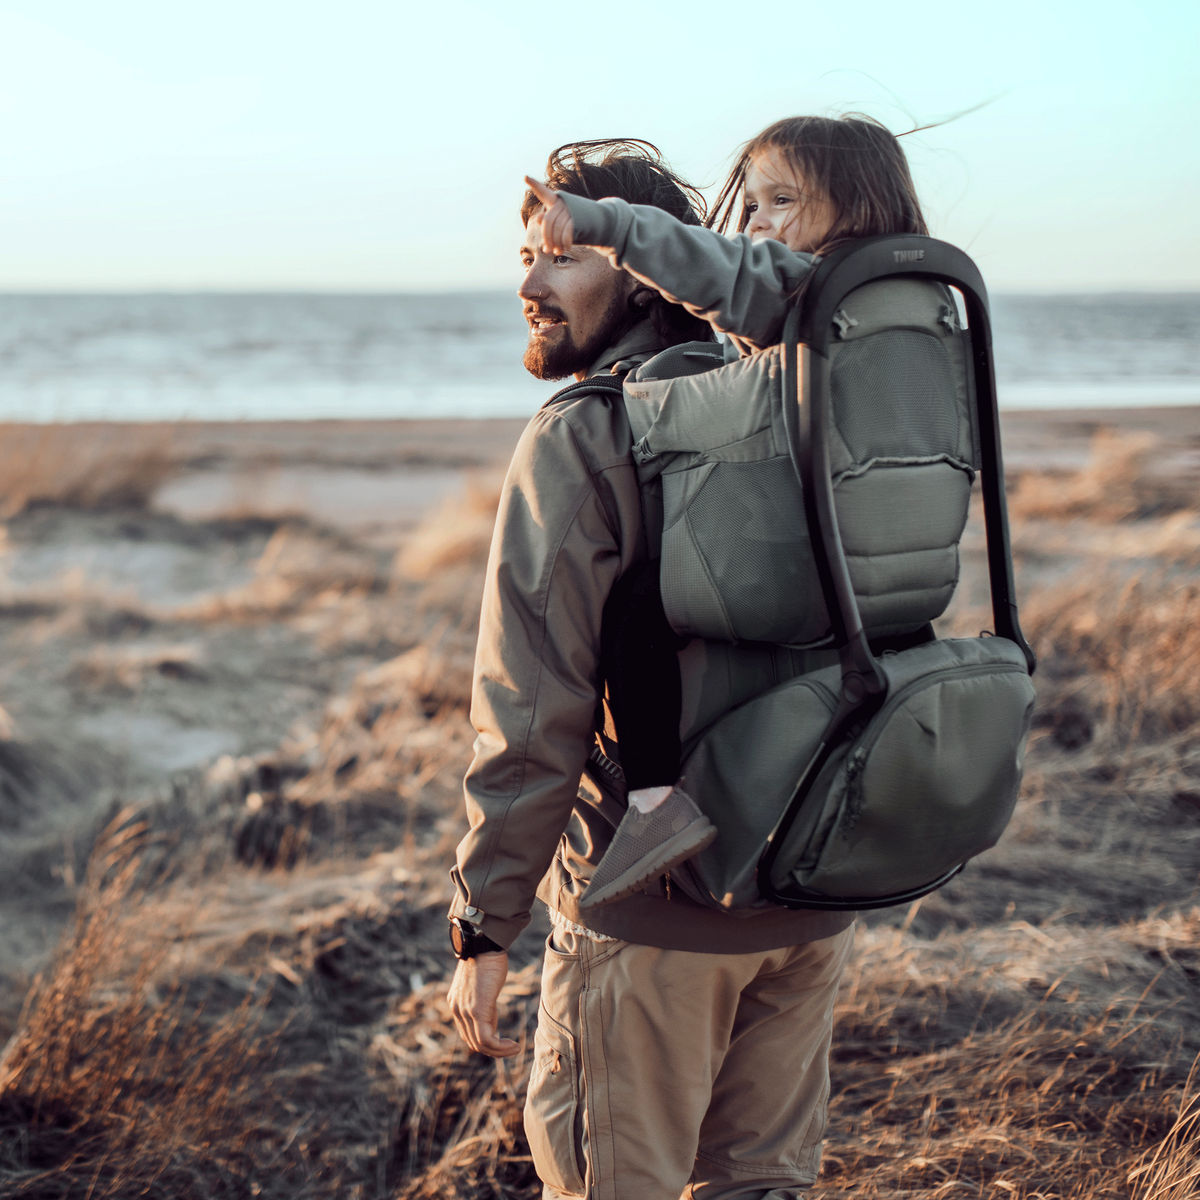 A man goes for a hike by the beach with a child in the Thule Sapling baby hiking backpack.